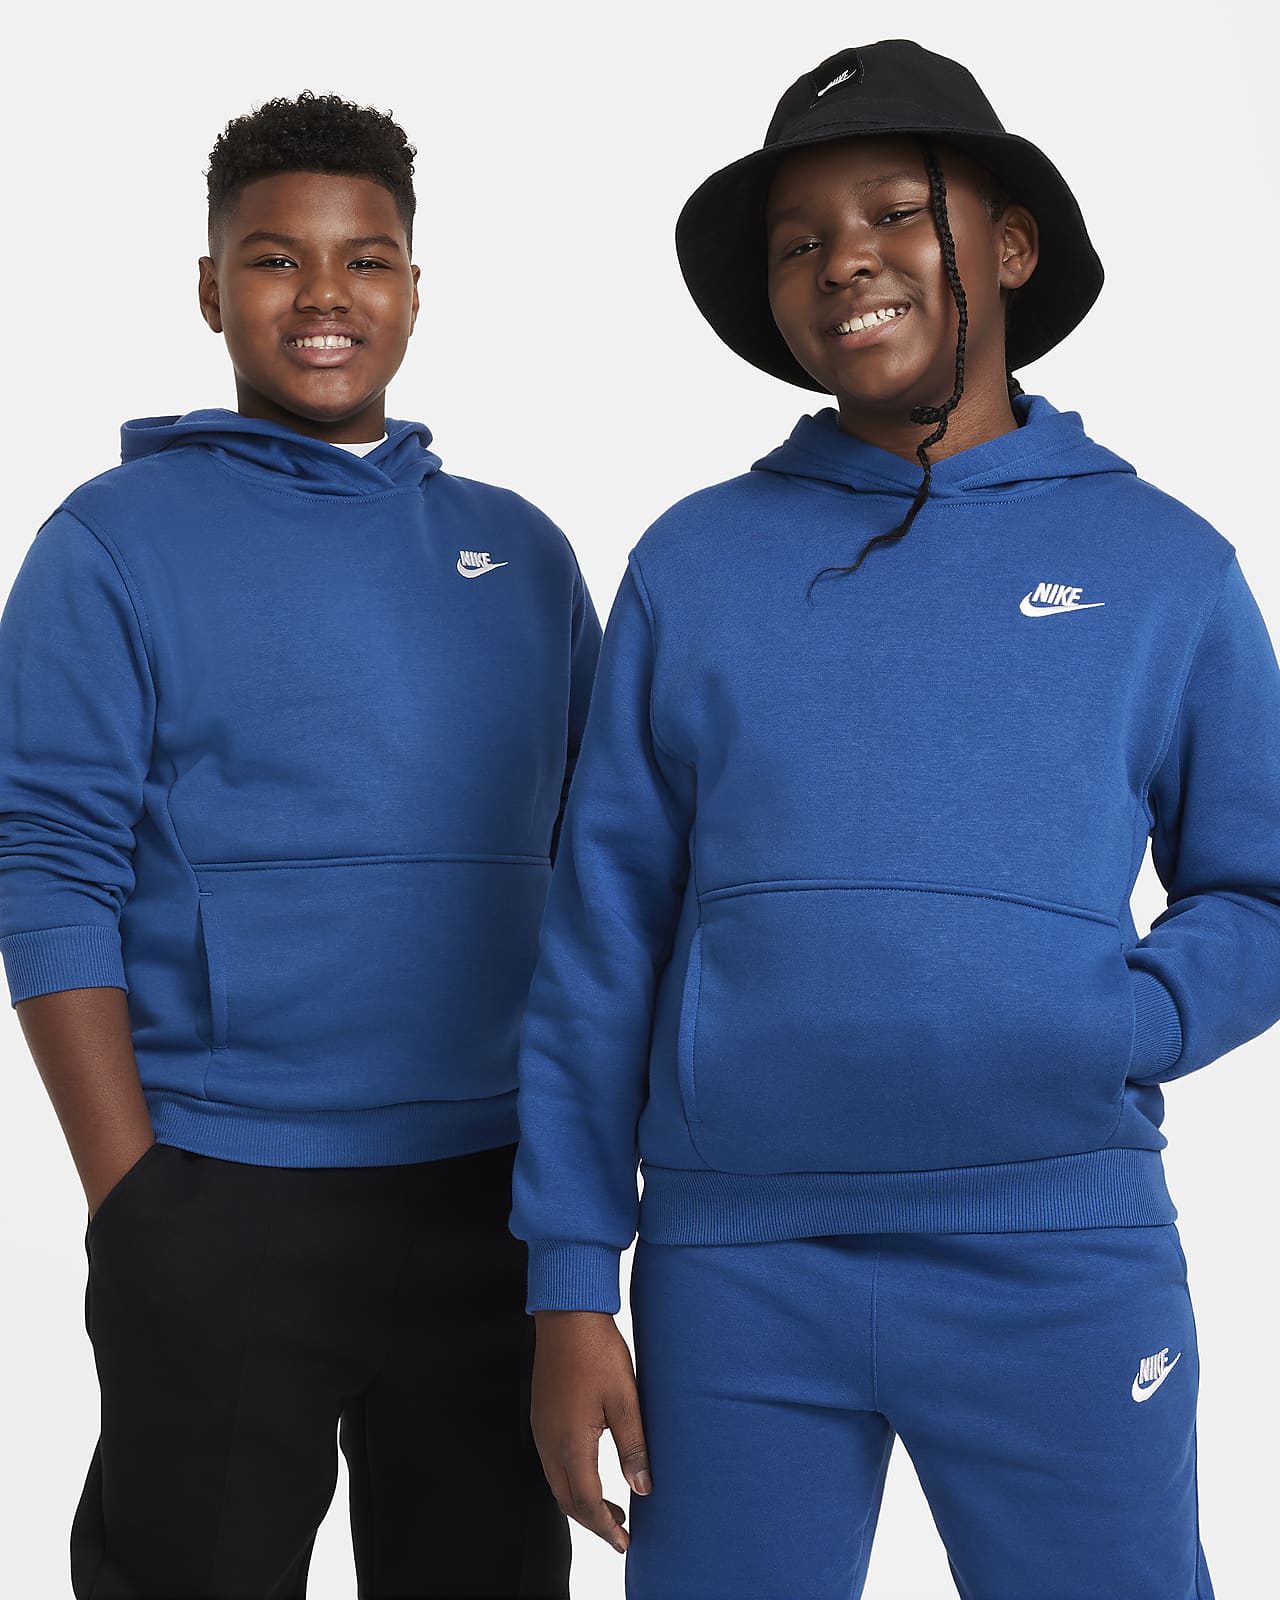 https://static.nike.com/a/images/t_PDP_1280_v1/f_auto,q_auto:eco/bf79fc93-1ac6-44eb-9d92-c1581159498f/sportswear-club-fleece-older-pullover-hoodie-pLKf46.png